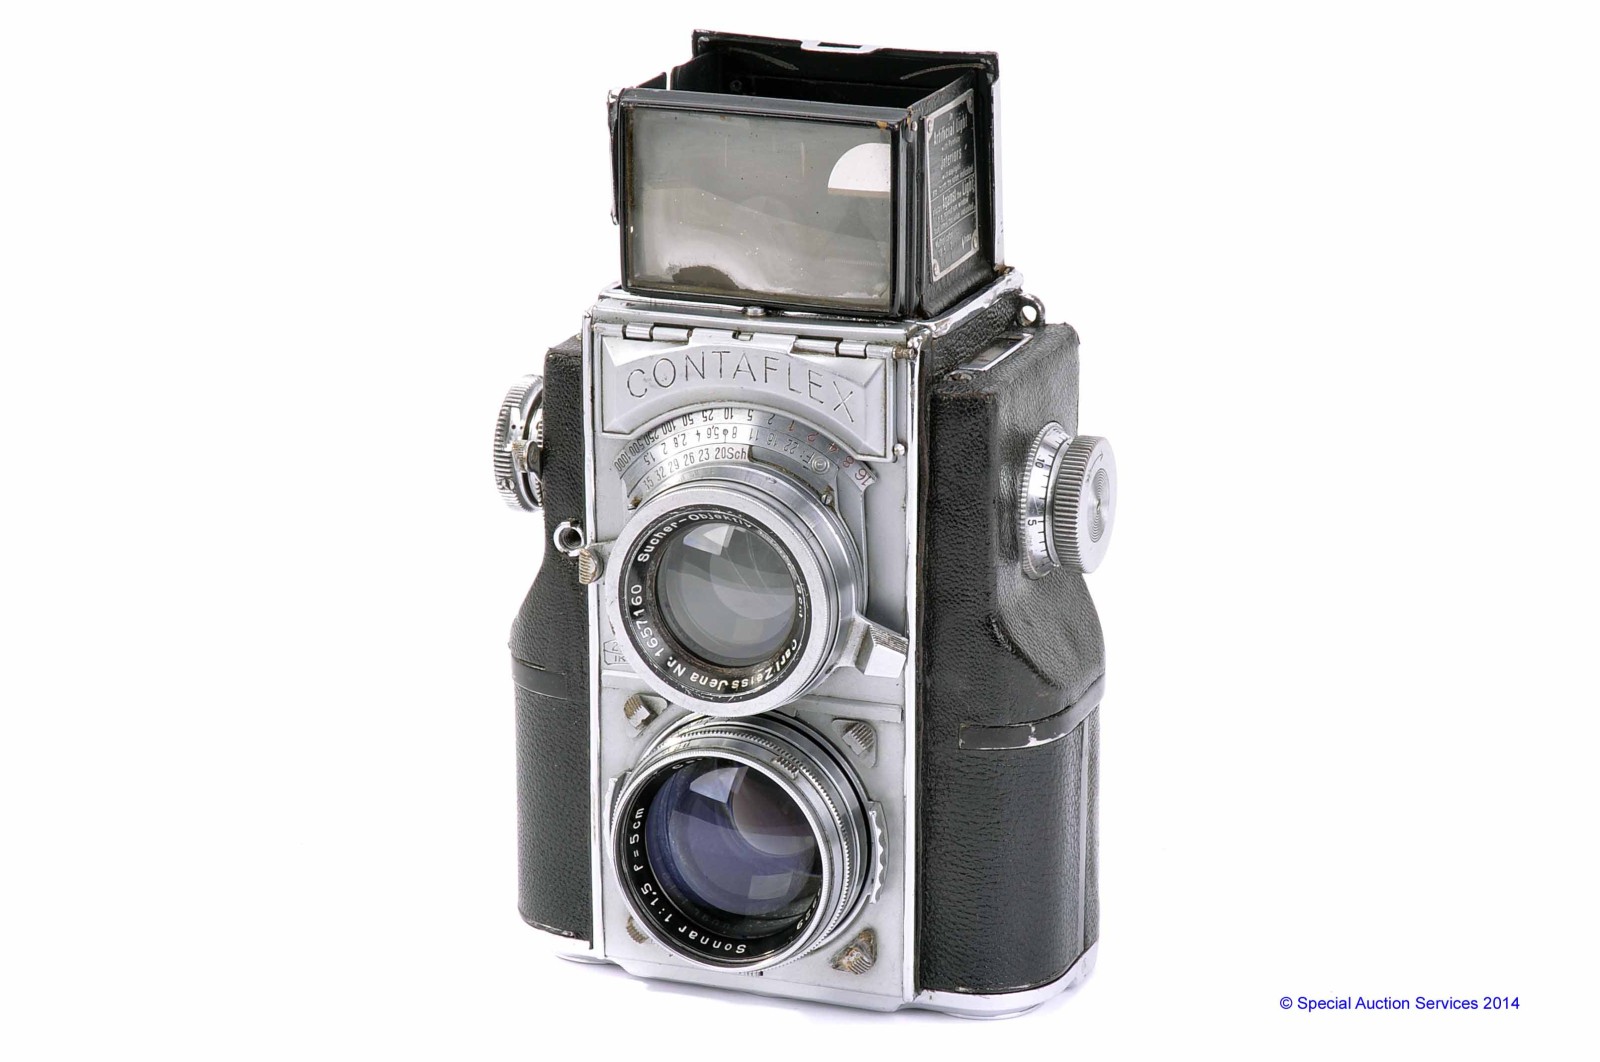 A Zeiss Ikon Contaflex TLR Camera,  serial no. Z42201, with Carl Zeiss Jena Sonnar f/1.5 50mm